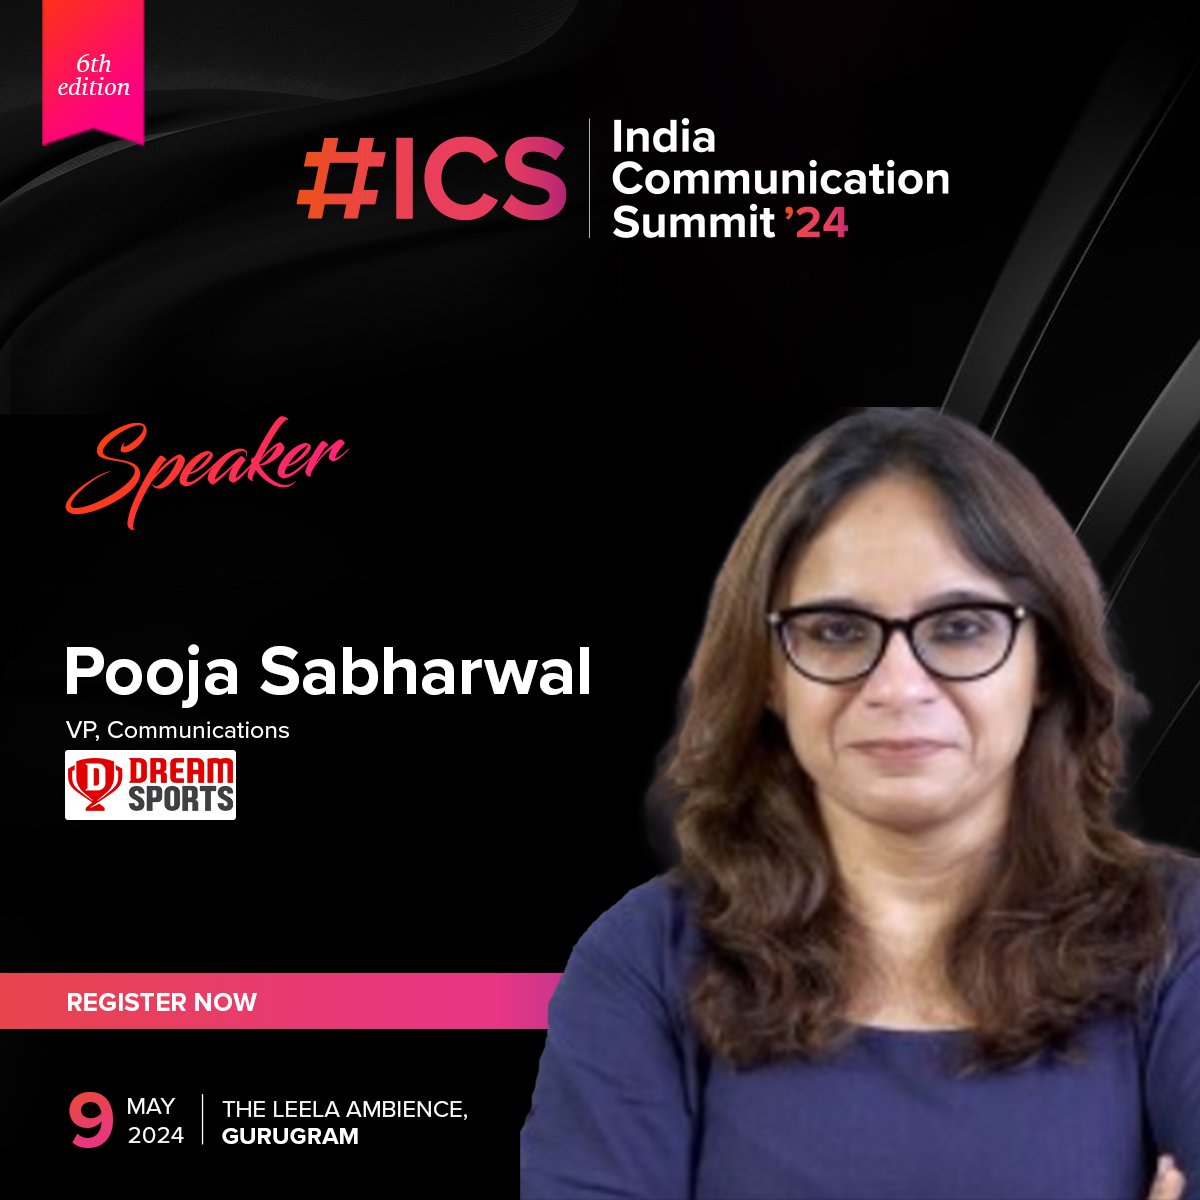 Get ready to be inspired by industry leaders at ET ICS 2024! We're excited to announce our esteemed speakers:  Shree Das - @BritanniaIndLtd & Pooja Sabharwal - @DreamSportsHQ 

Register now: bit.ly/49TV4EE  

#ETICS #CommunicationSummit #PR #ReputationManagement